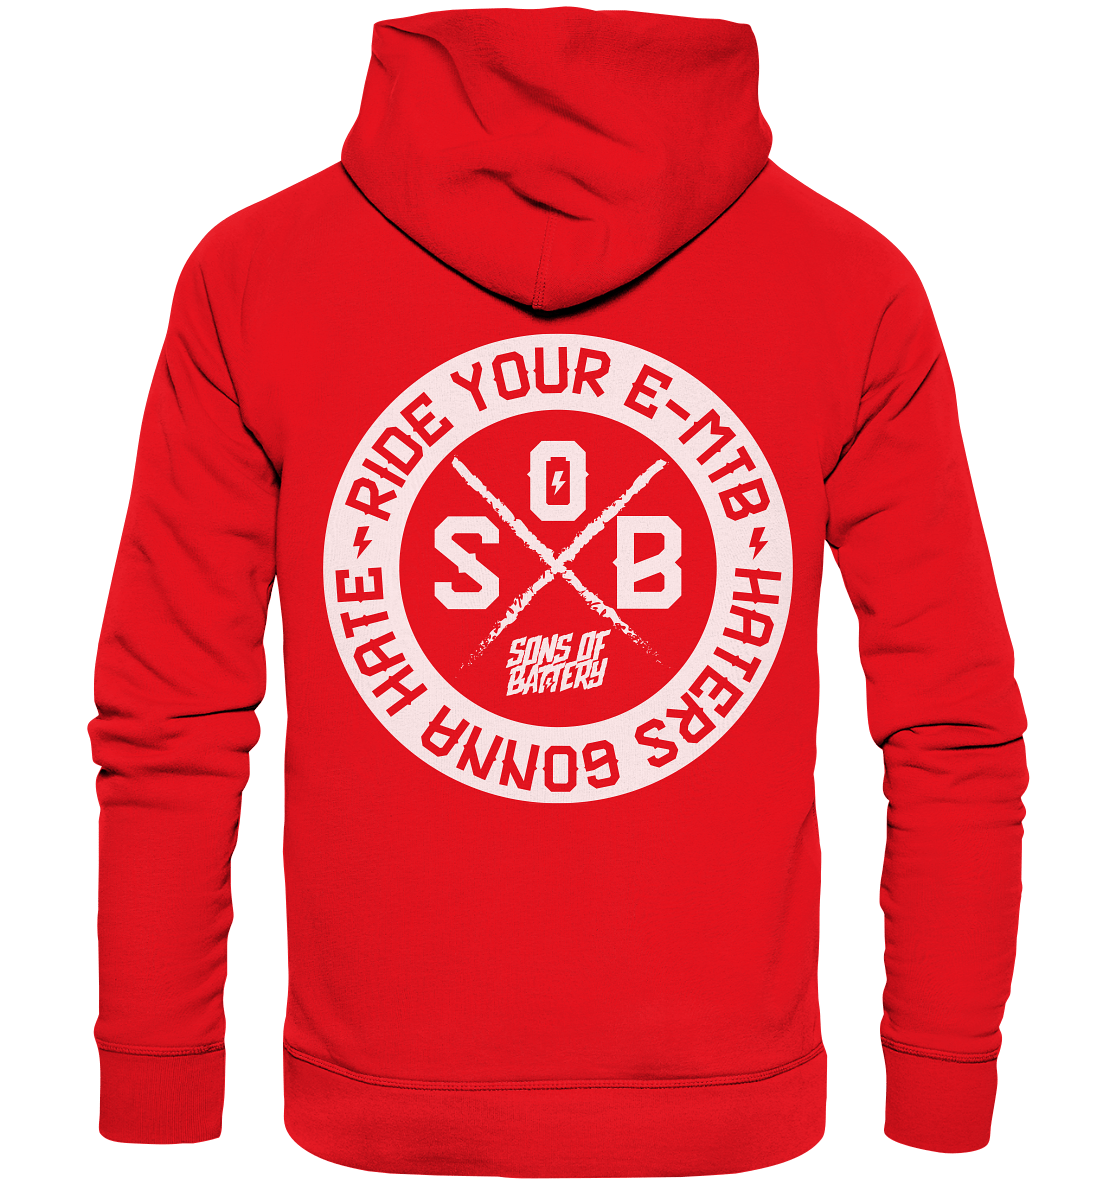 Sons of Battery® - E-MTB Brand & Community Hoodies Bright Red / XS Haters gonna Hate - Organic Hoodie (Flip Label) E-Bike-Community